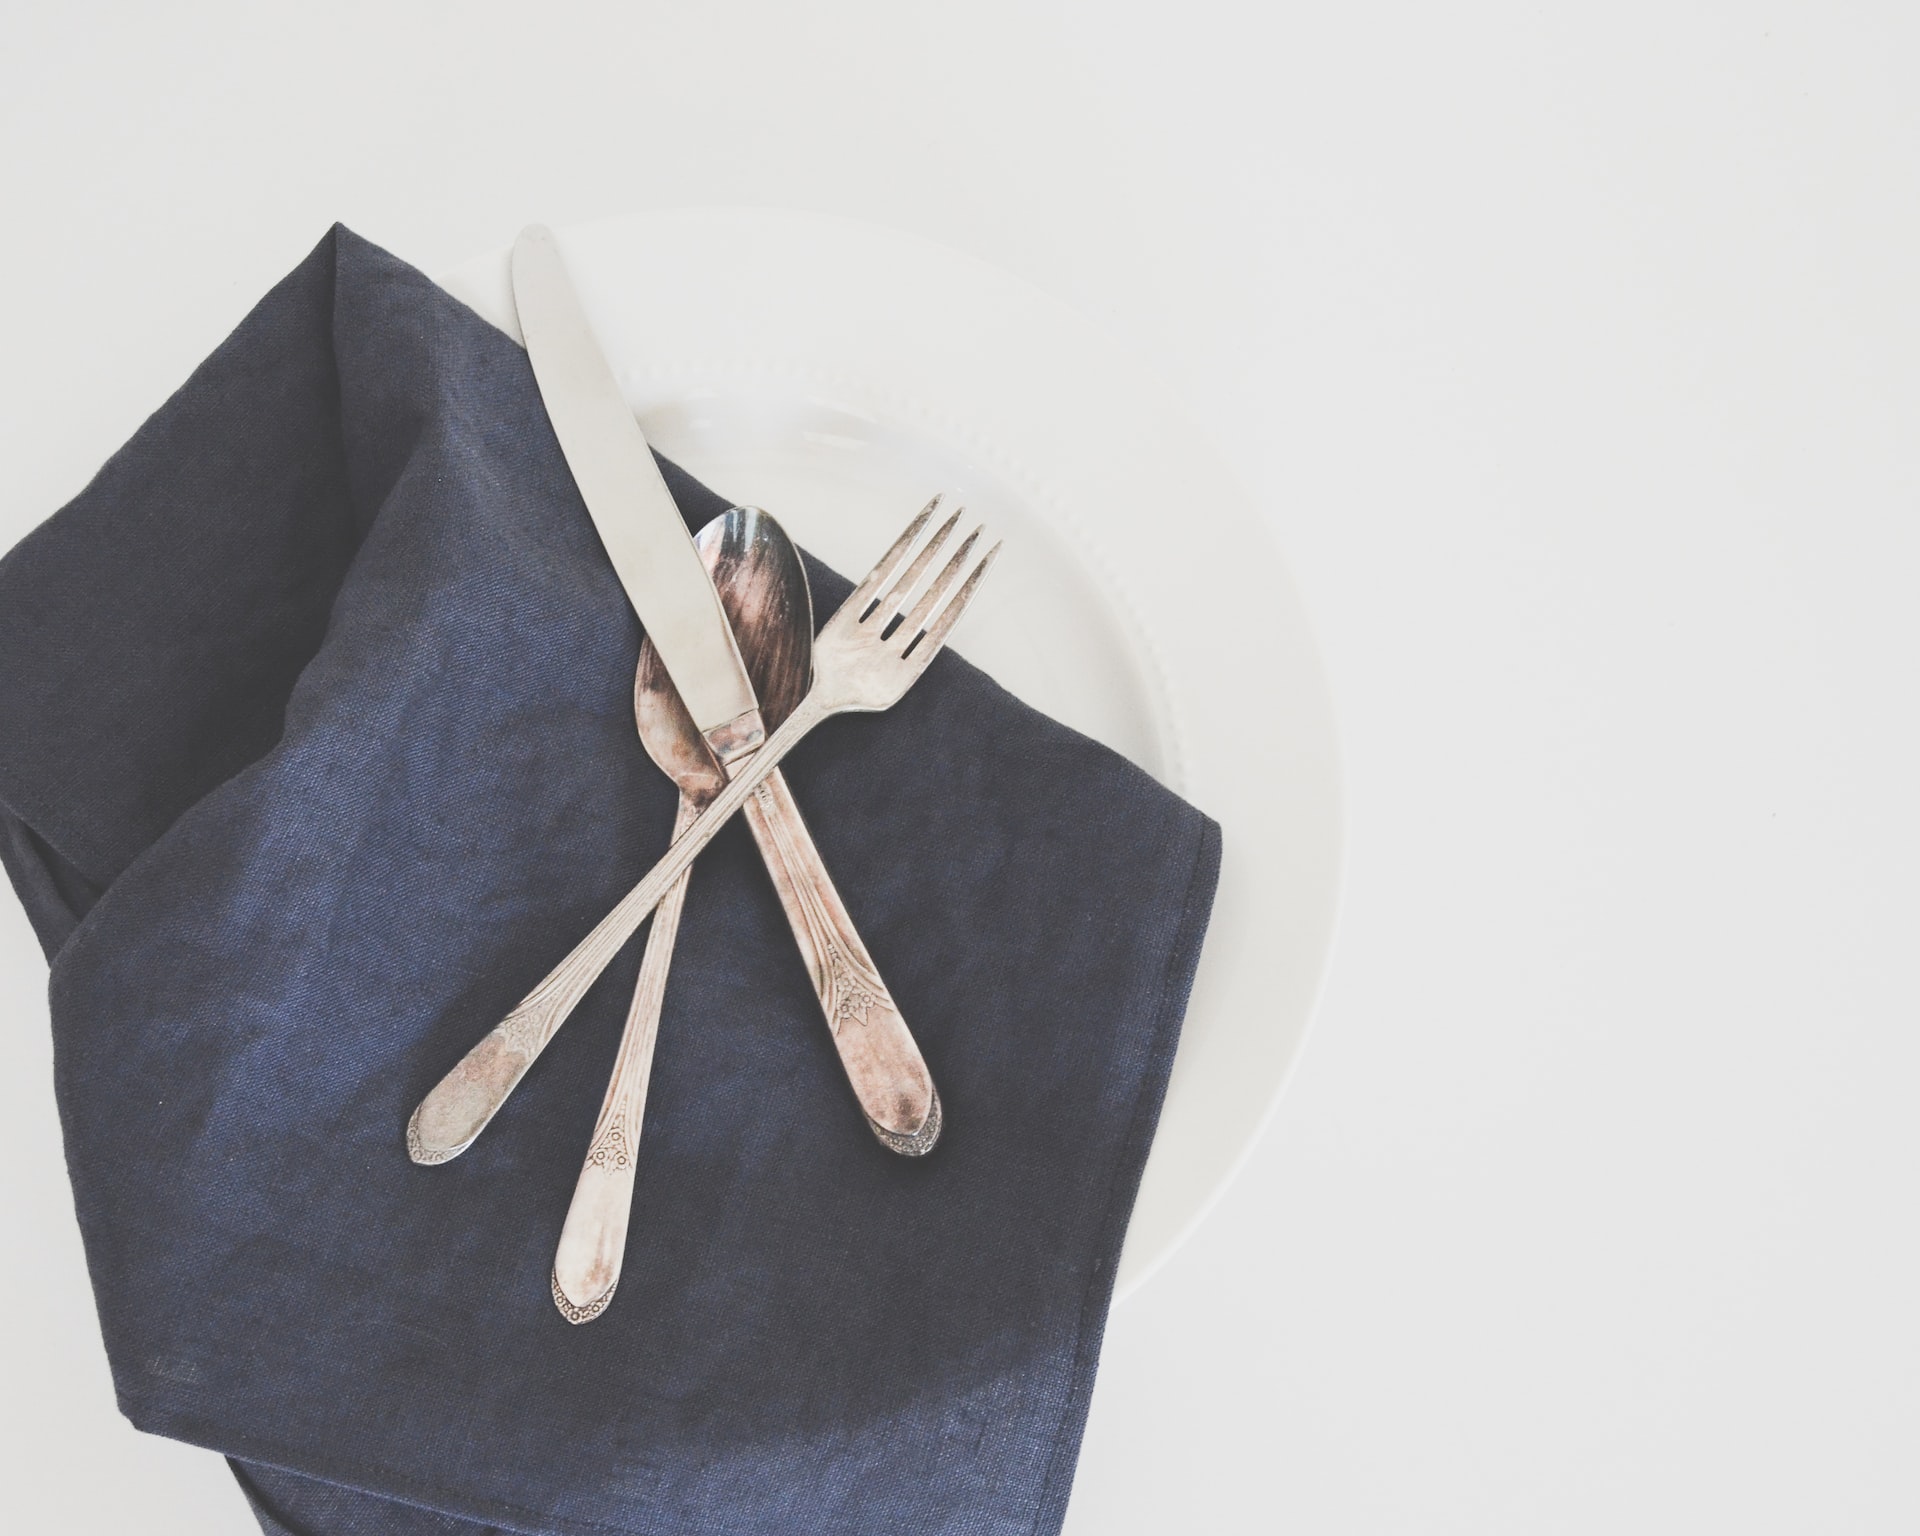 Look no further than white linen napkins for your dinner party!